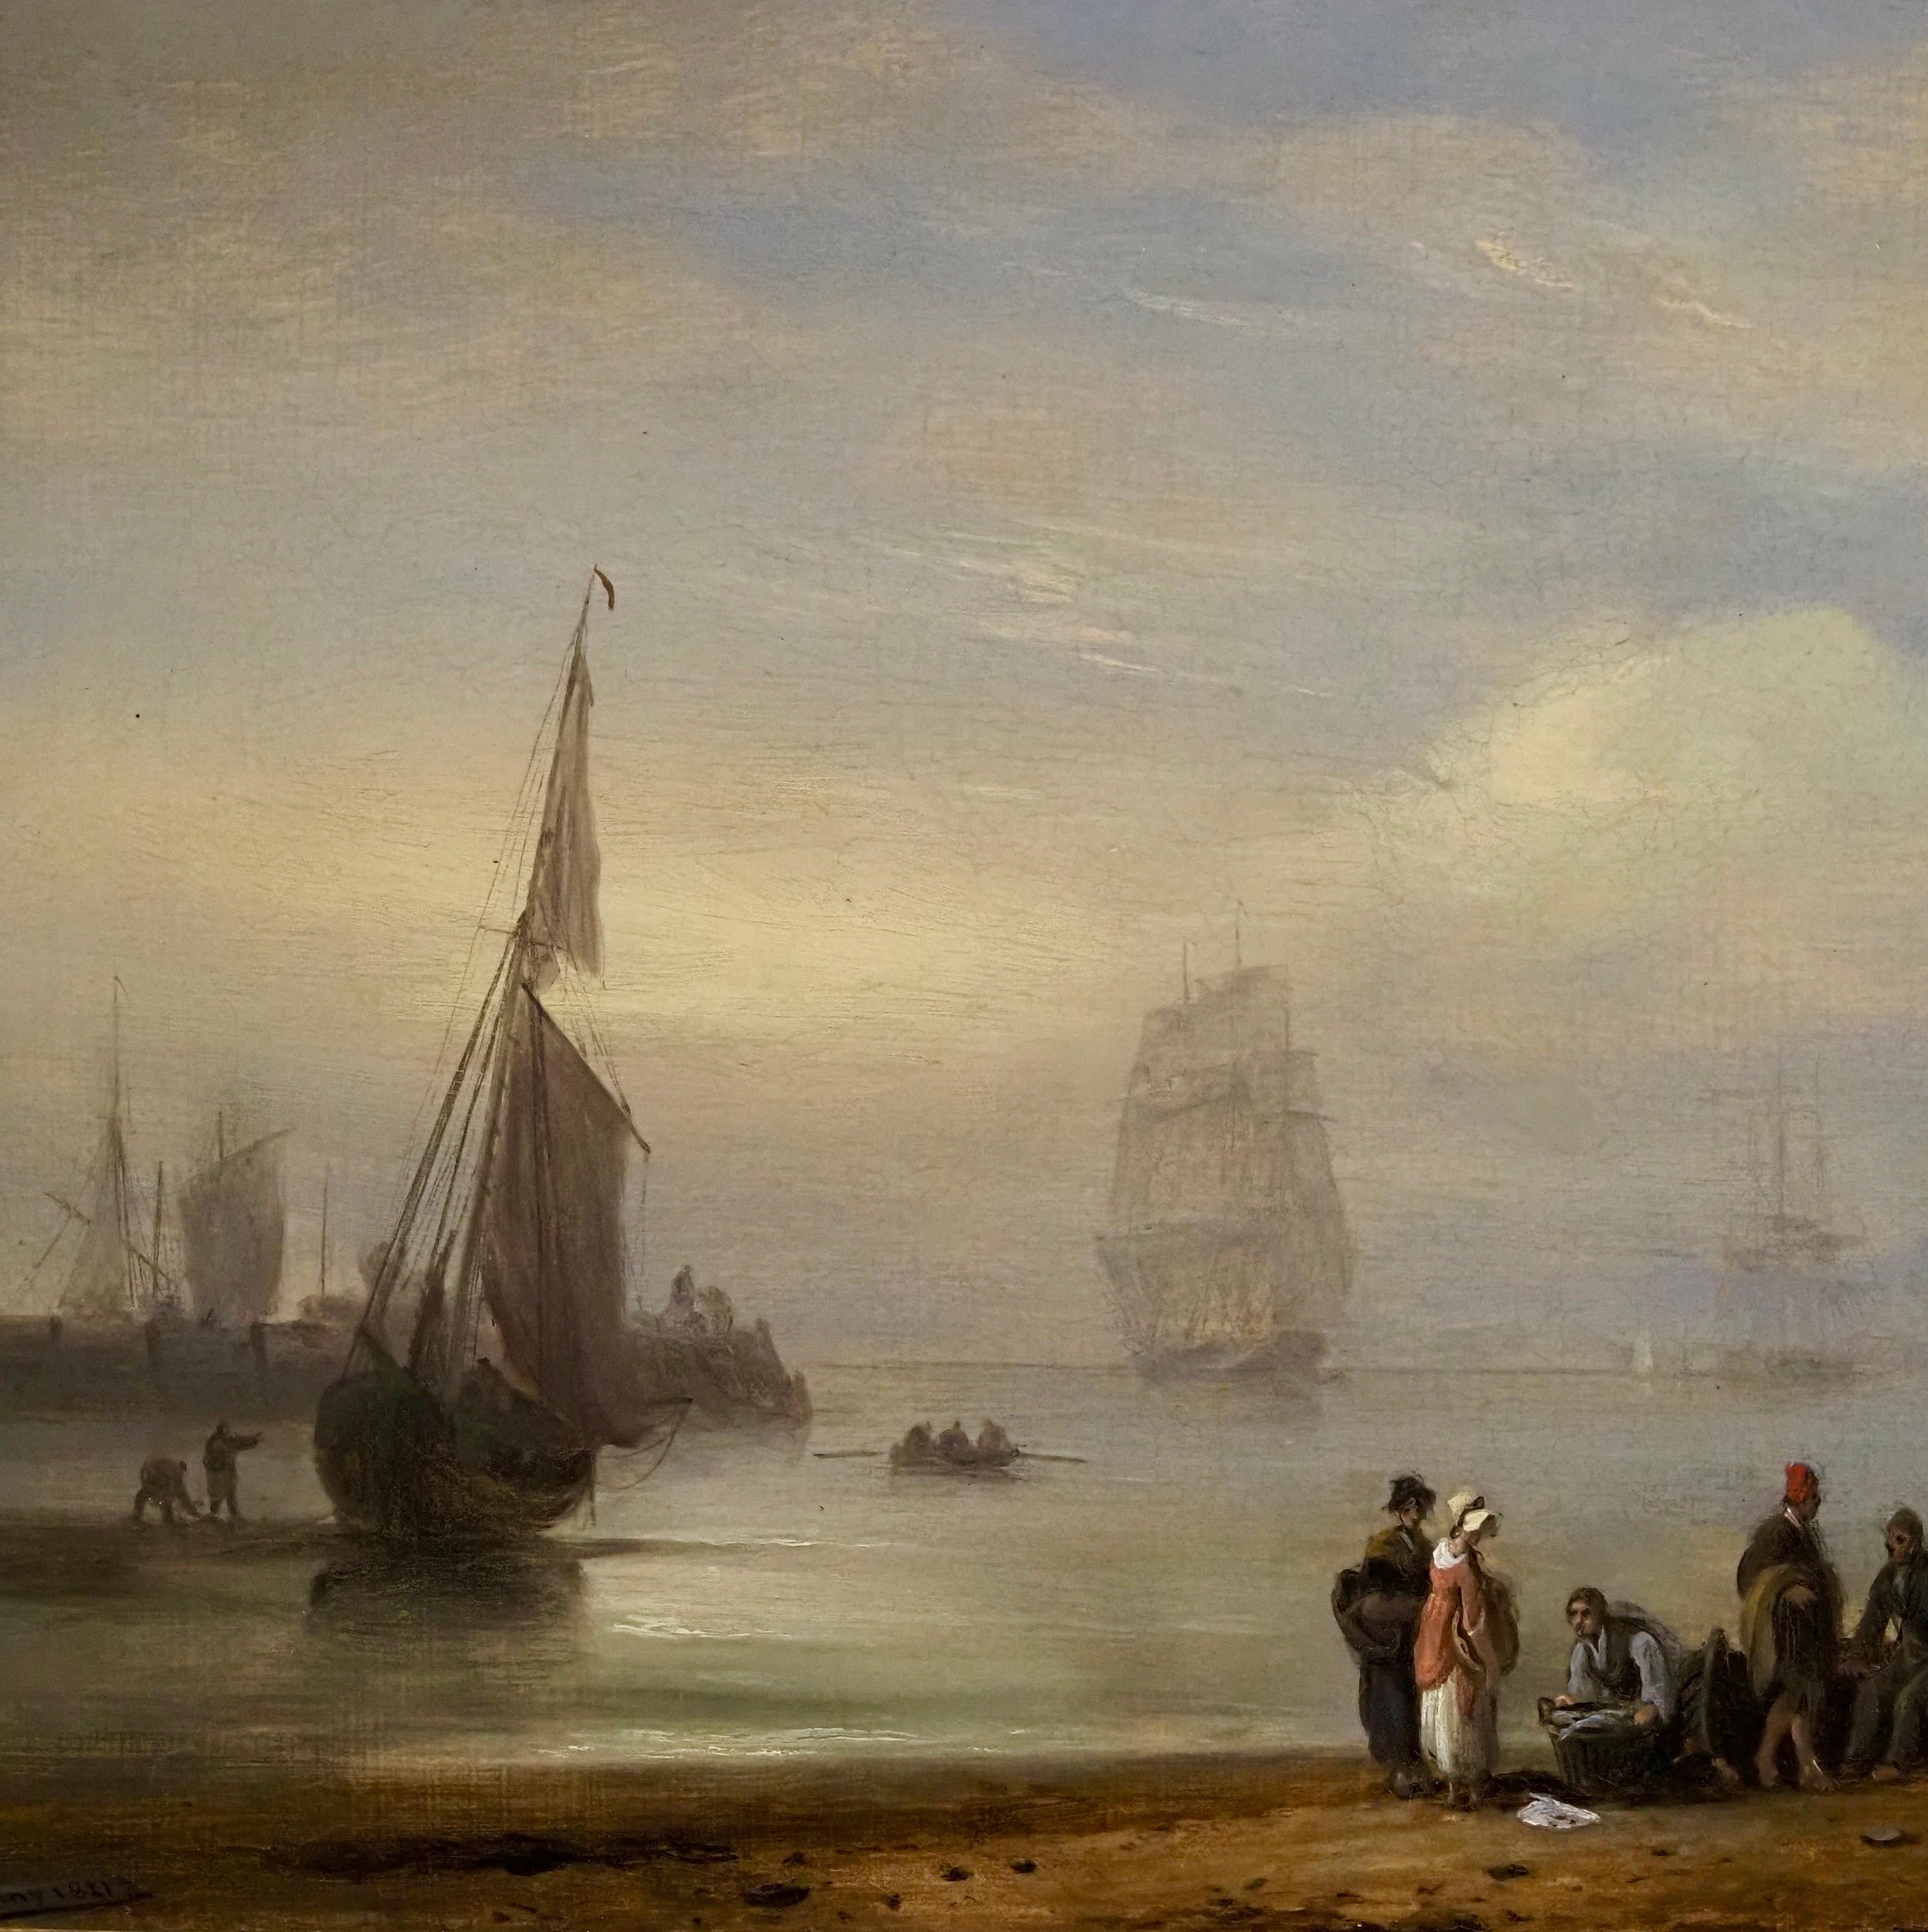 Thomas Luny (1759-1837)
A fishing vessels at rest in harbour
Signed and dated 'Luny 1831' lower left
Oil on canvas
Canvas Size - 12 x 16 in
Framed Size - 17 x 21 in

Thomas Luny was born in Cornwall in 1759. After moving to London about the age of